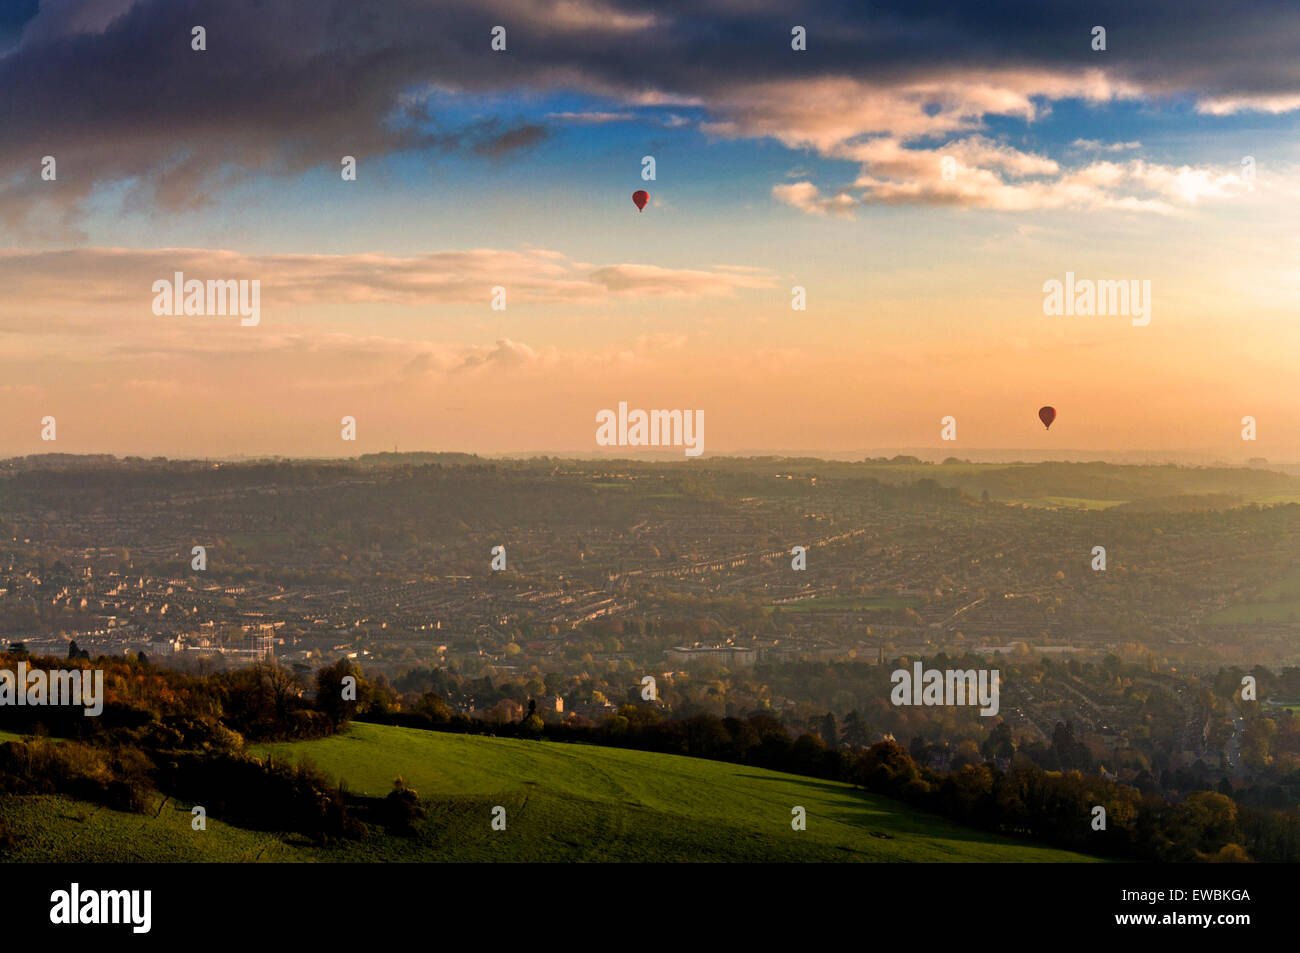 View from Lansdown with hot air balloons over Bath, Somerset, England,UK Stock Photo